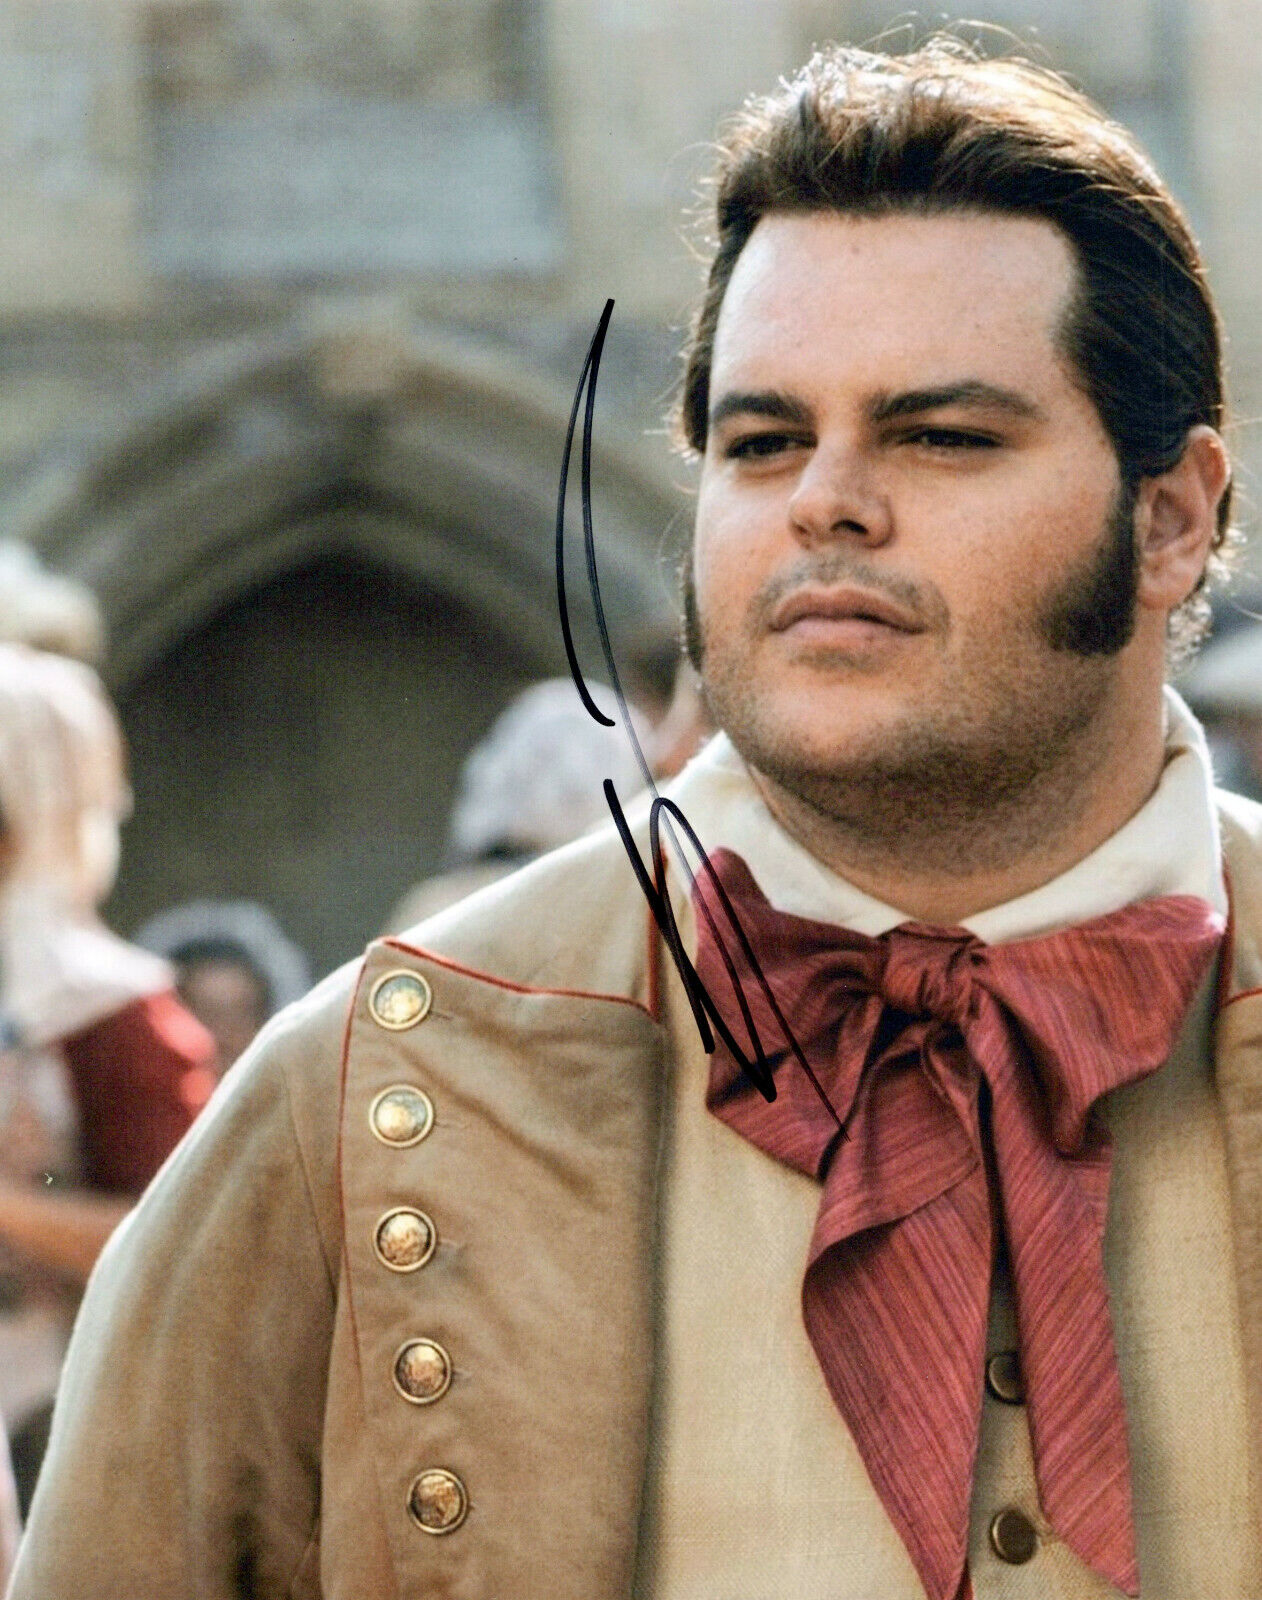 Josh Gad Beauty and the Beast autographed Photo Poster painting signed 8x10 #5 Disney LeFou